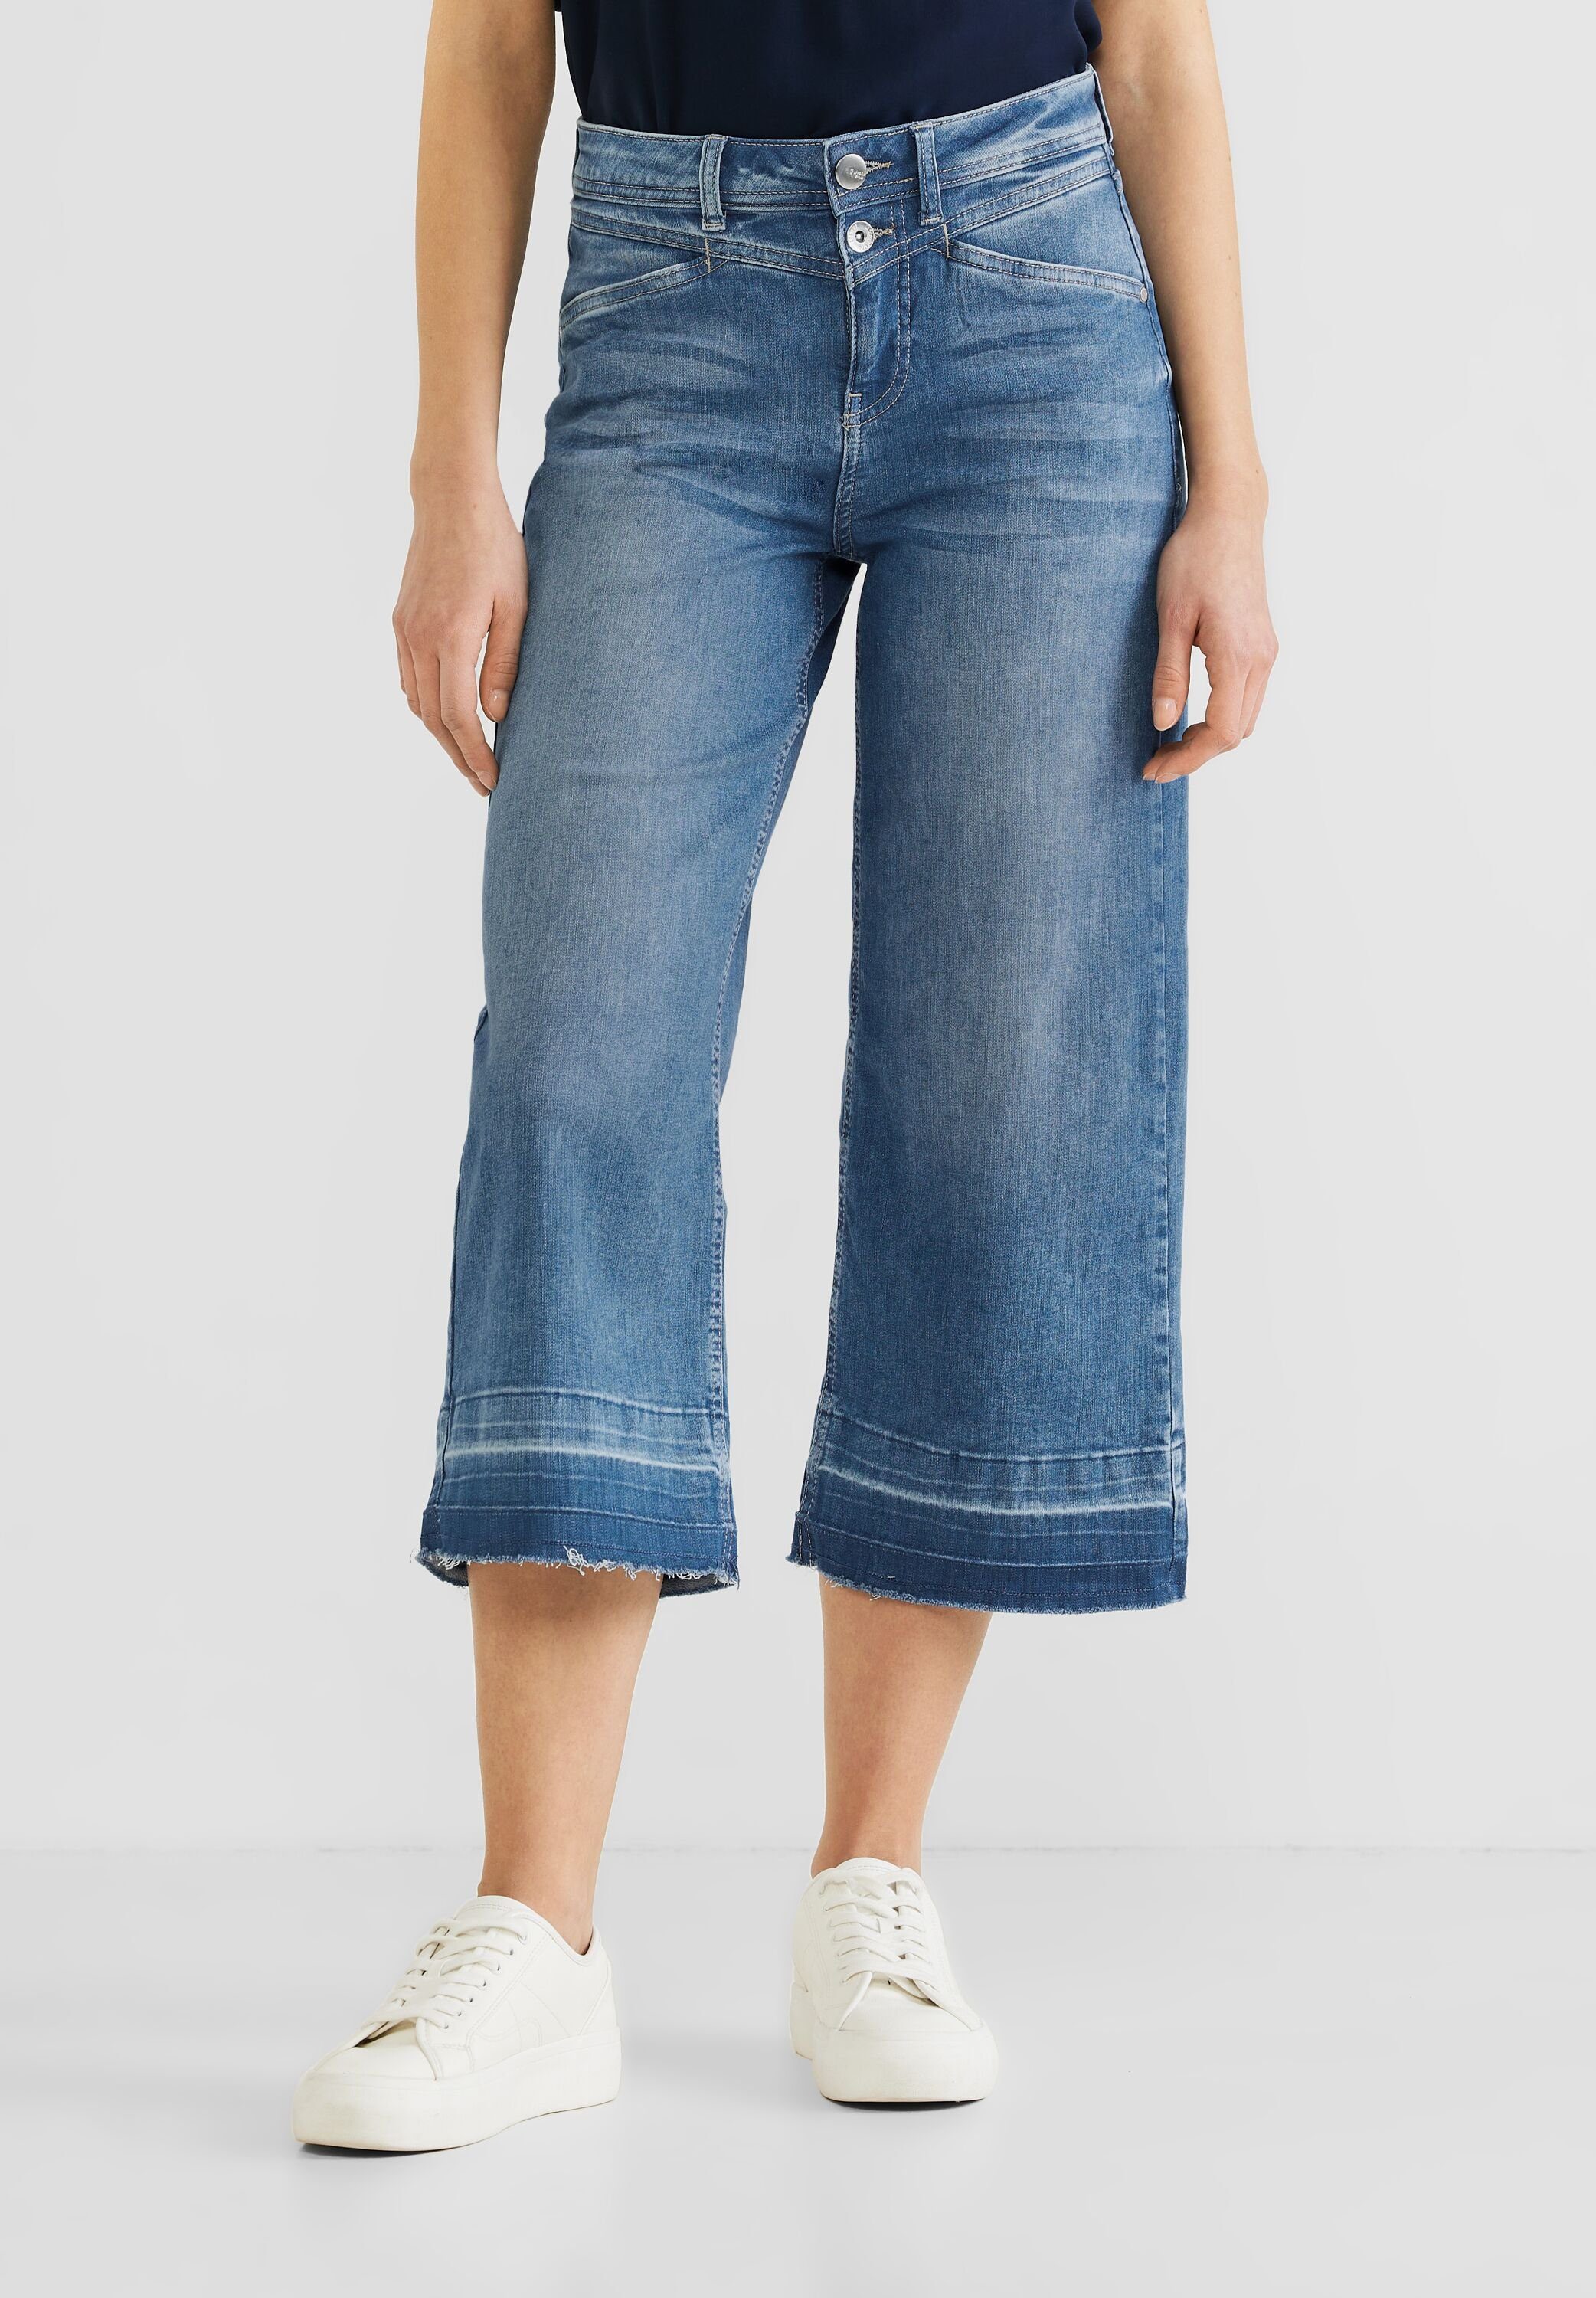 STREET ONE Bequeme Jeans Street One Casual Fit Jeans Culotte in Sky Blue Wa (1-tlg) Nicht Vorhanden